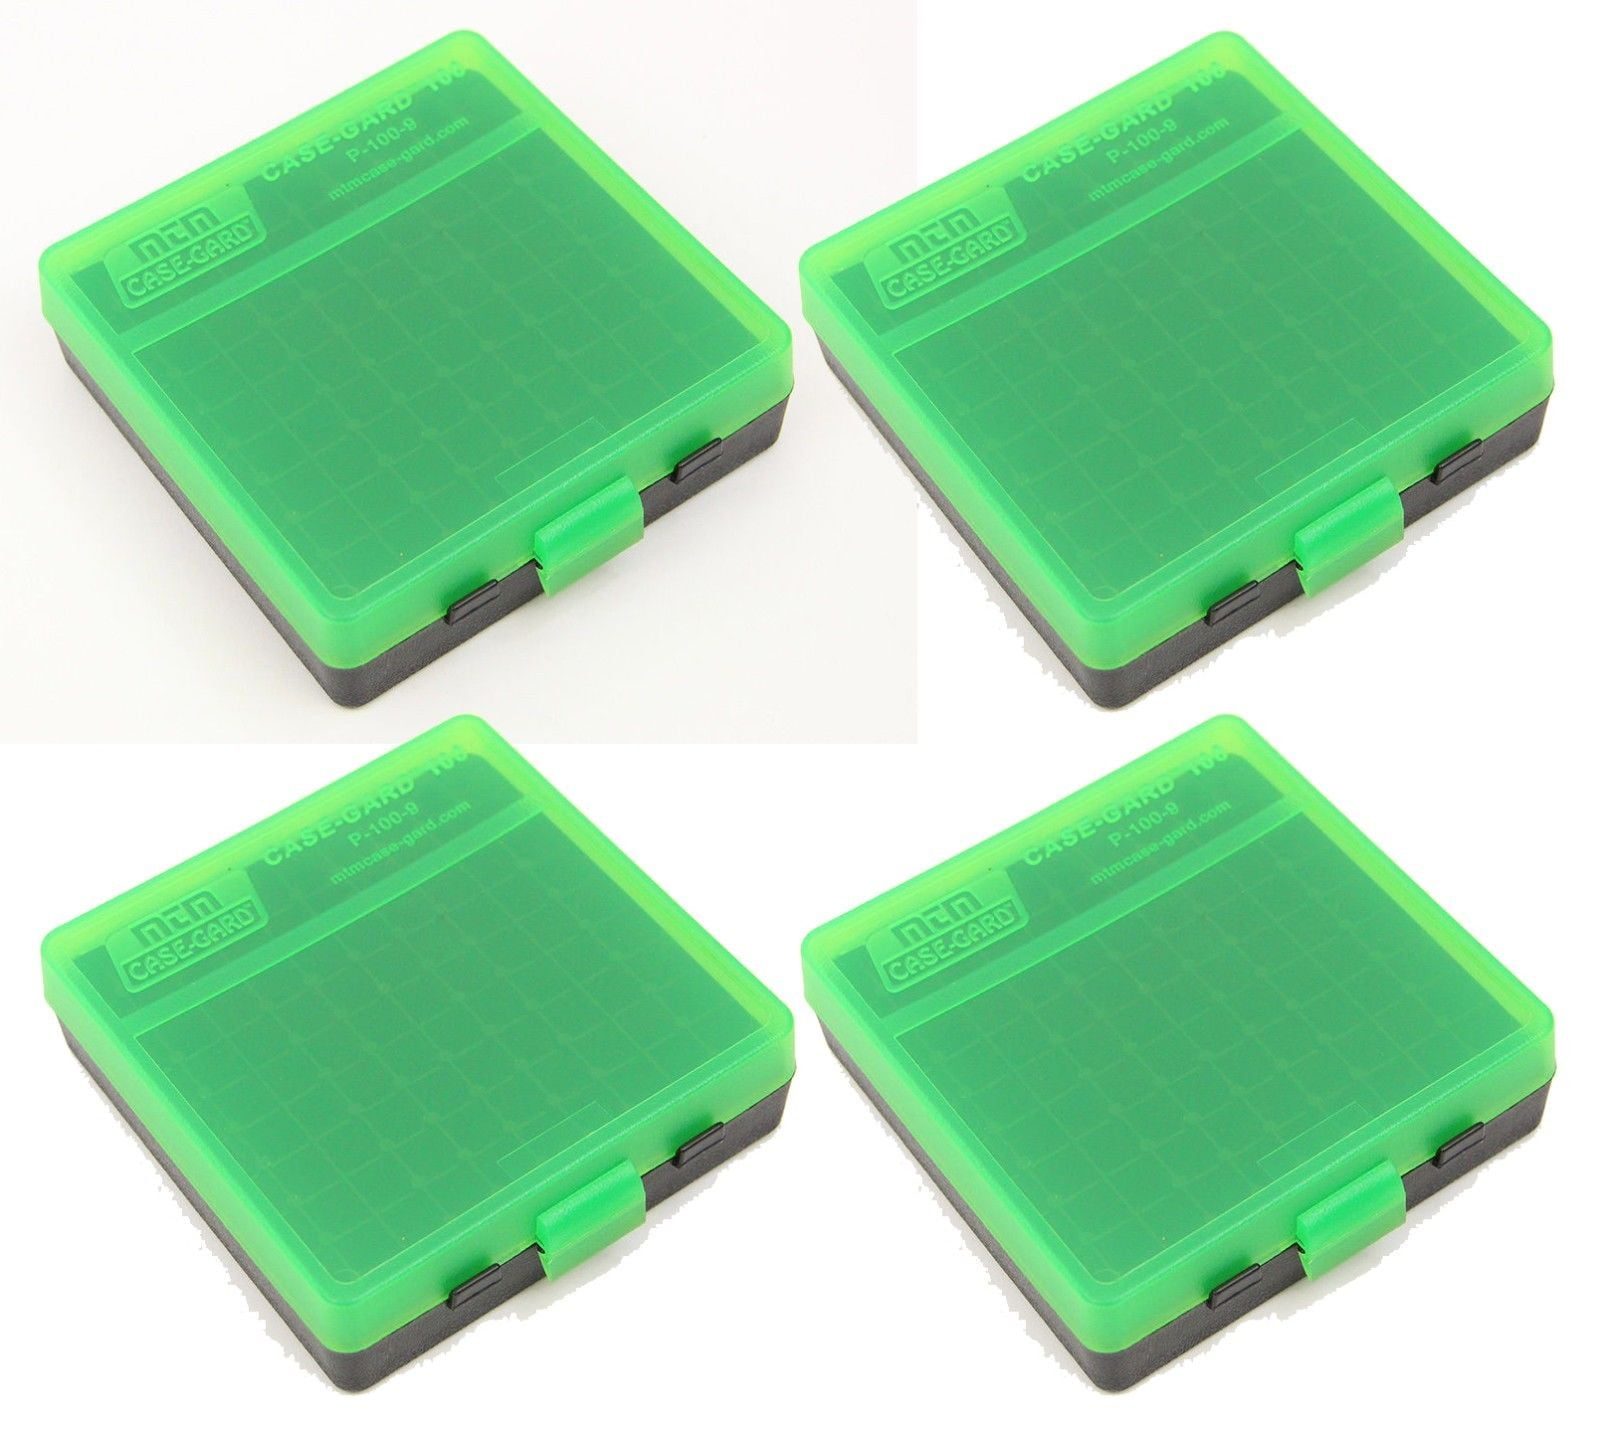 3 x 9mm/.380 Ammo Box Storage 100 Round Boxes each CLEAR COLOR Case 